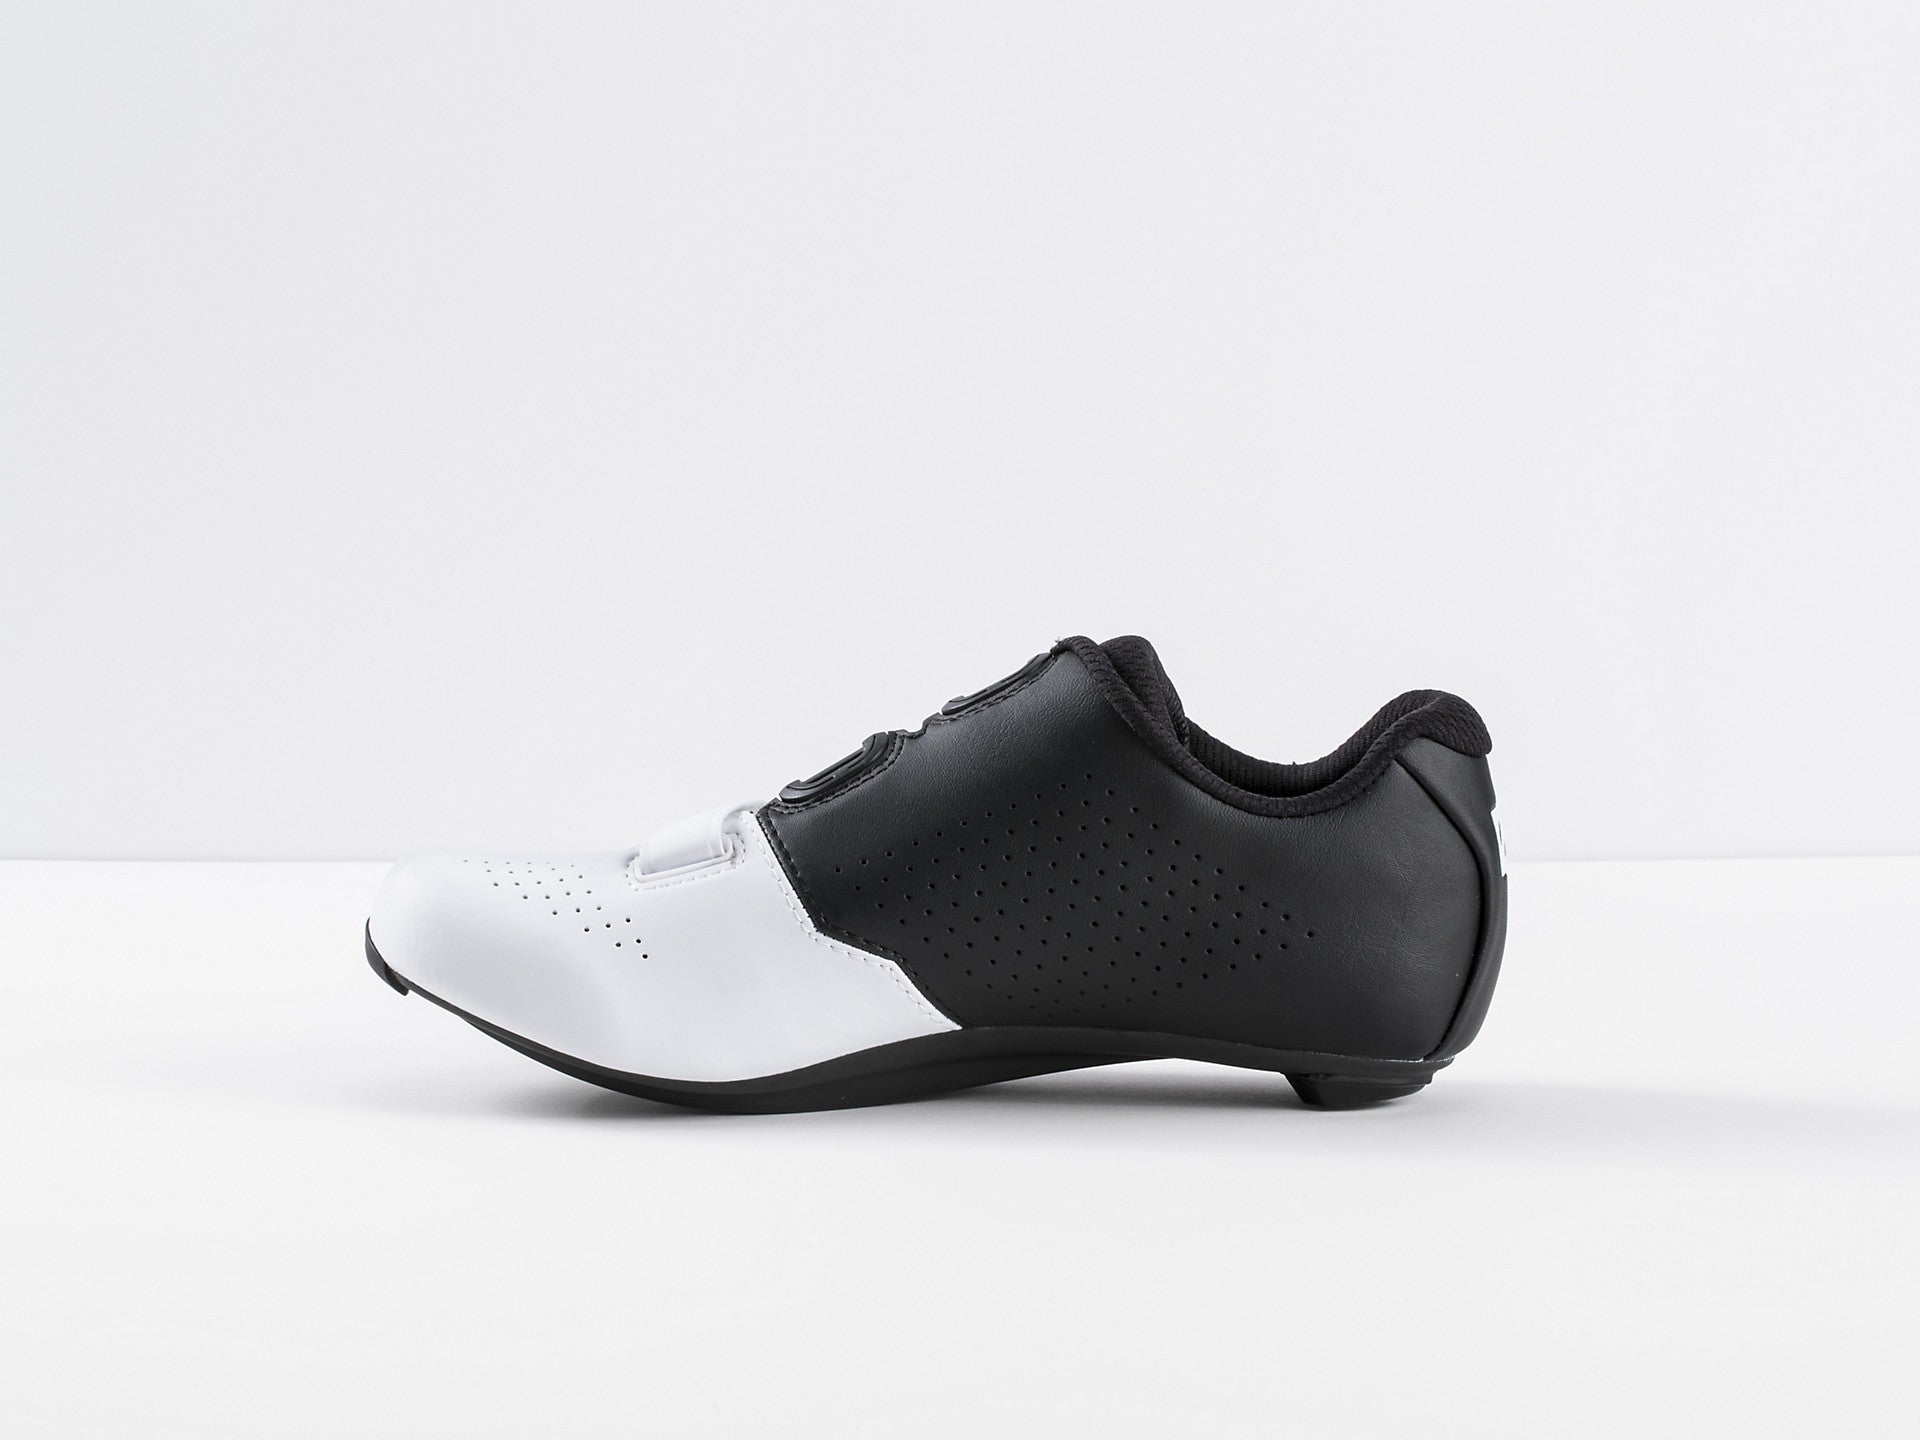 Bontrager Velocis Women's Road Cycling Shoes